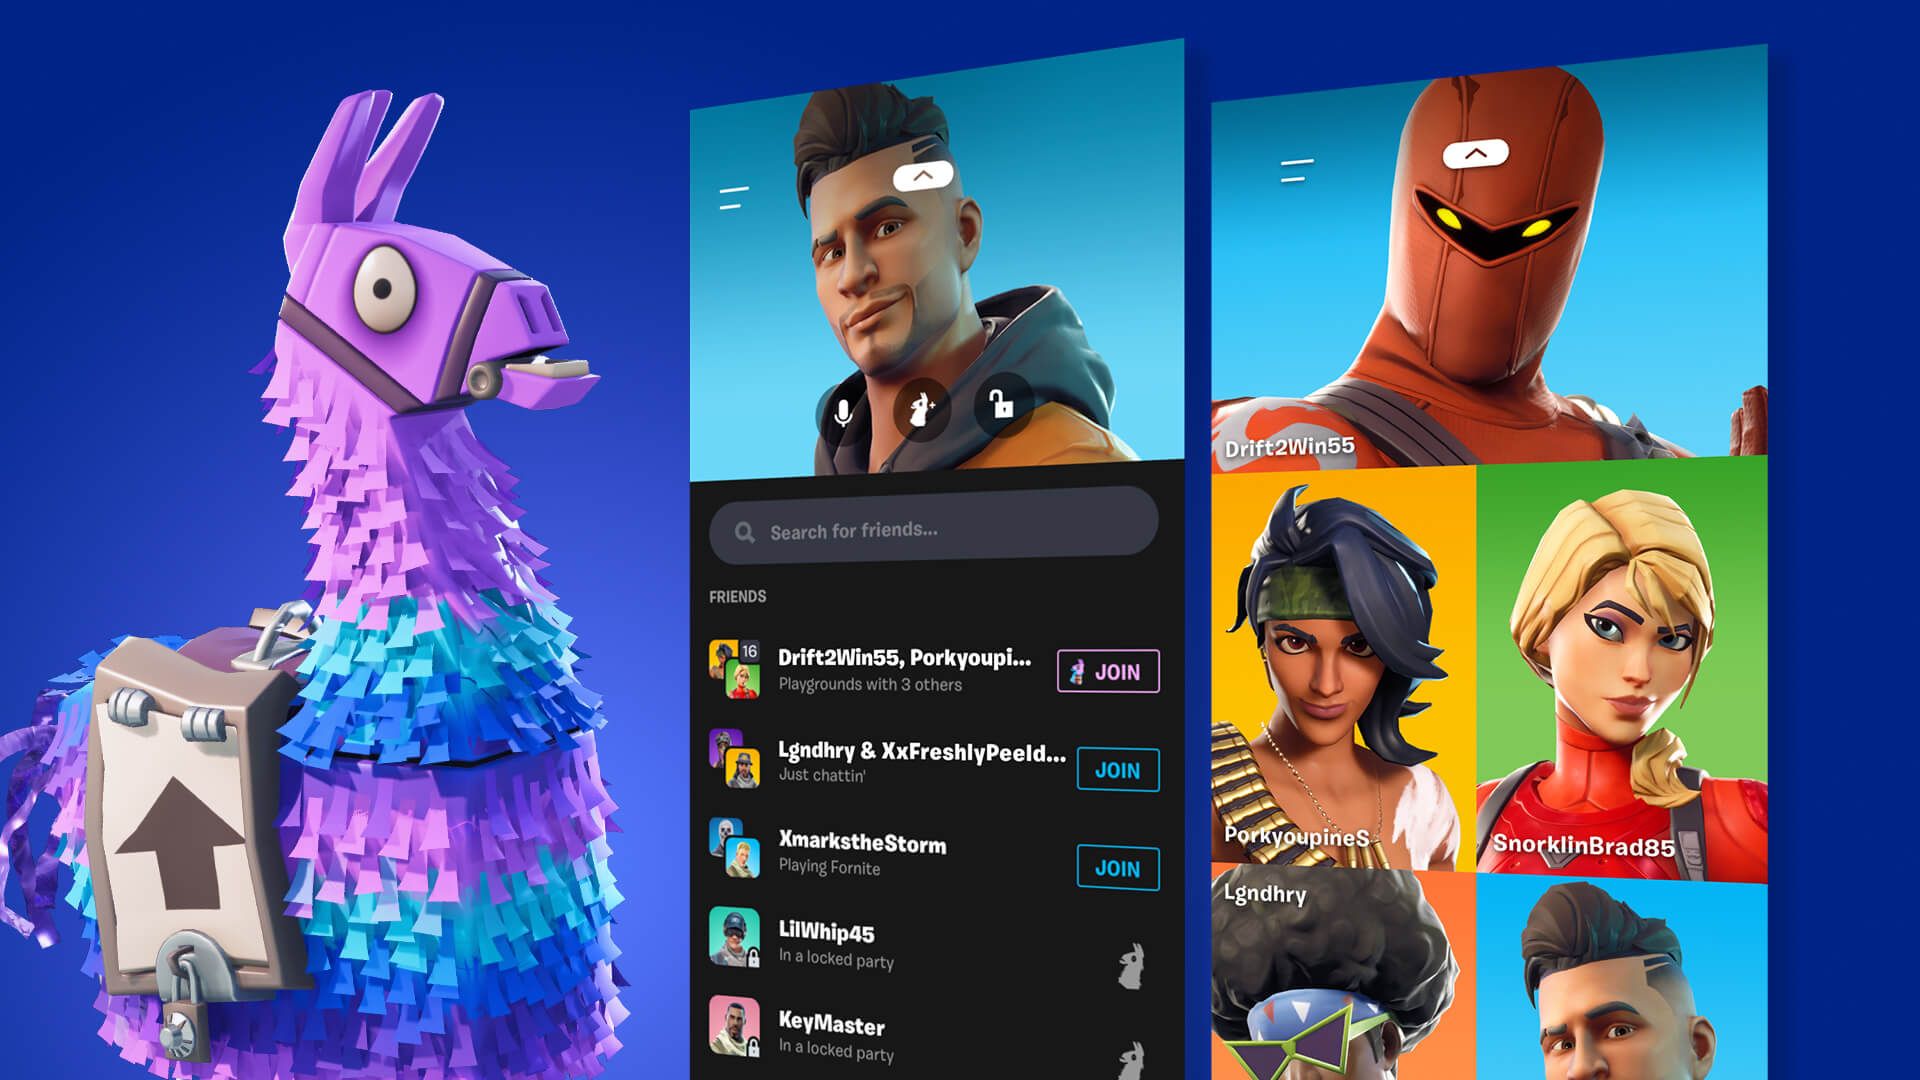 Patch Notes for Fortnite v10.31 - Party Hub